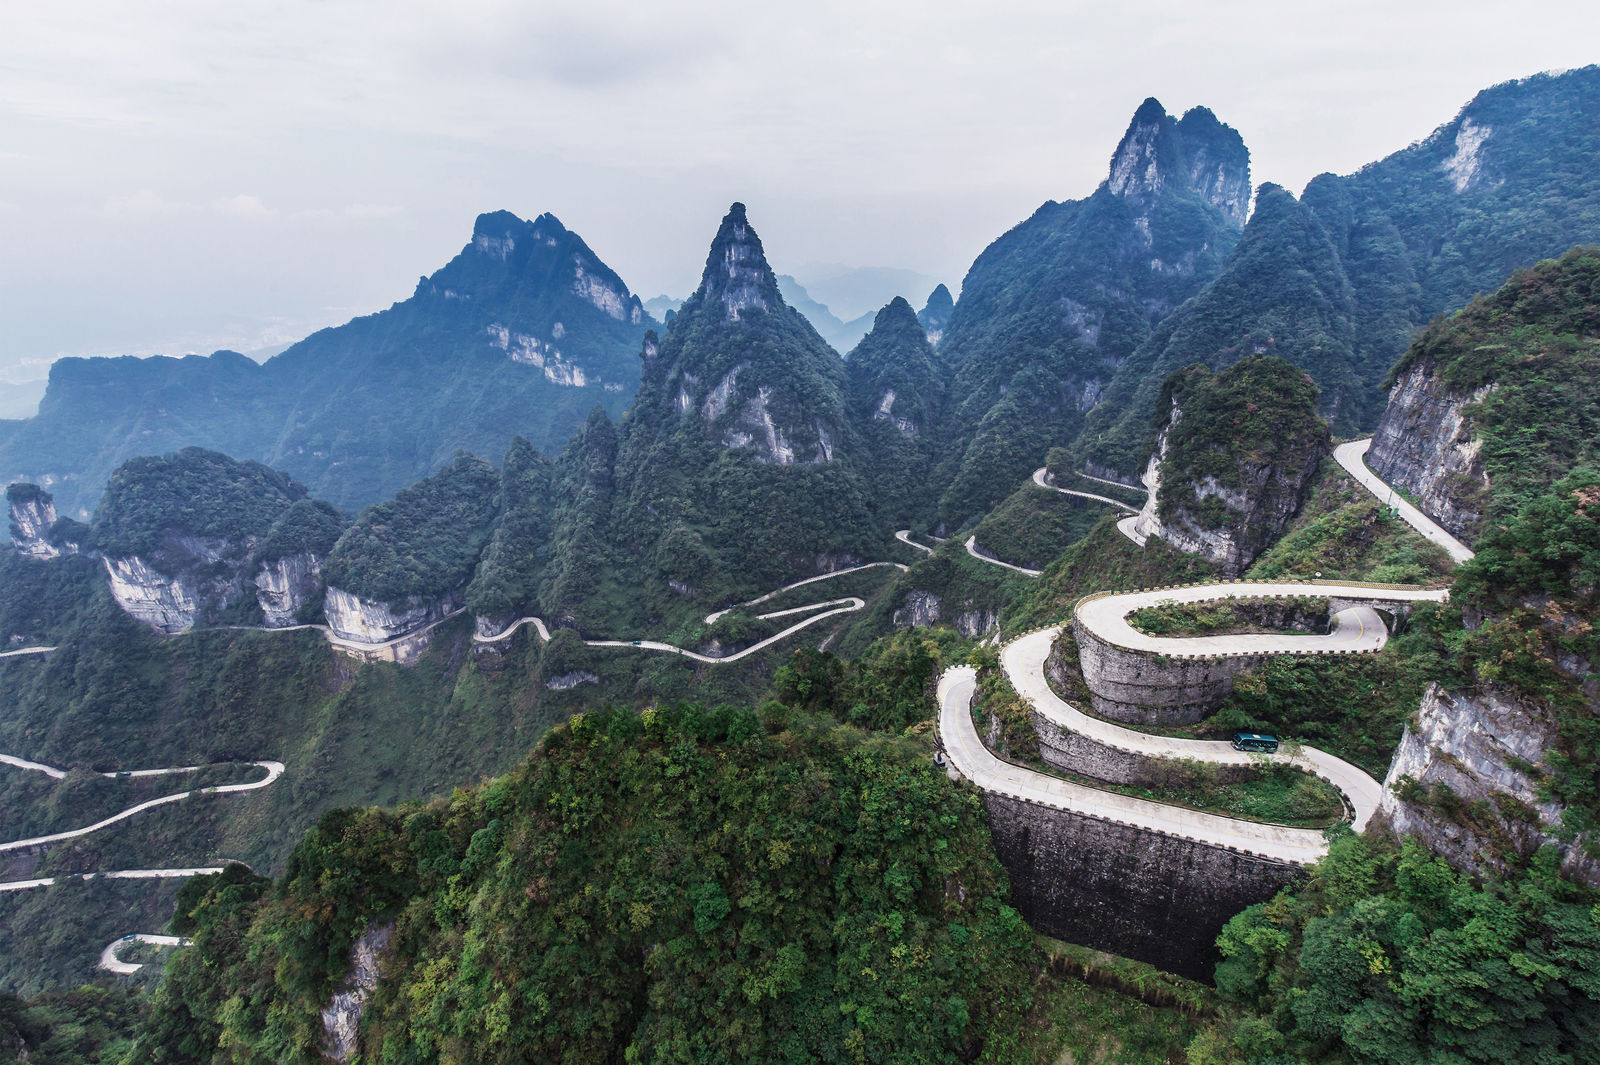 Storming the summit for e-mobility: Volkswagen targets record on Tianmen Mountain